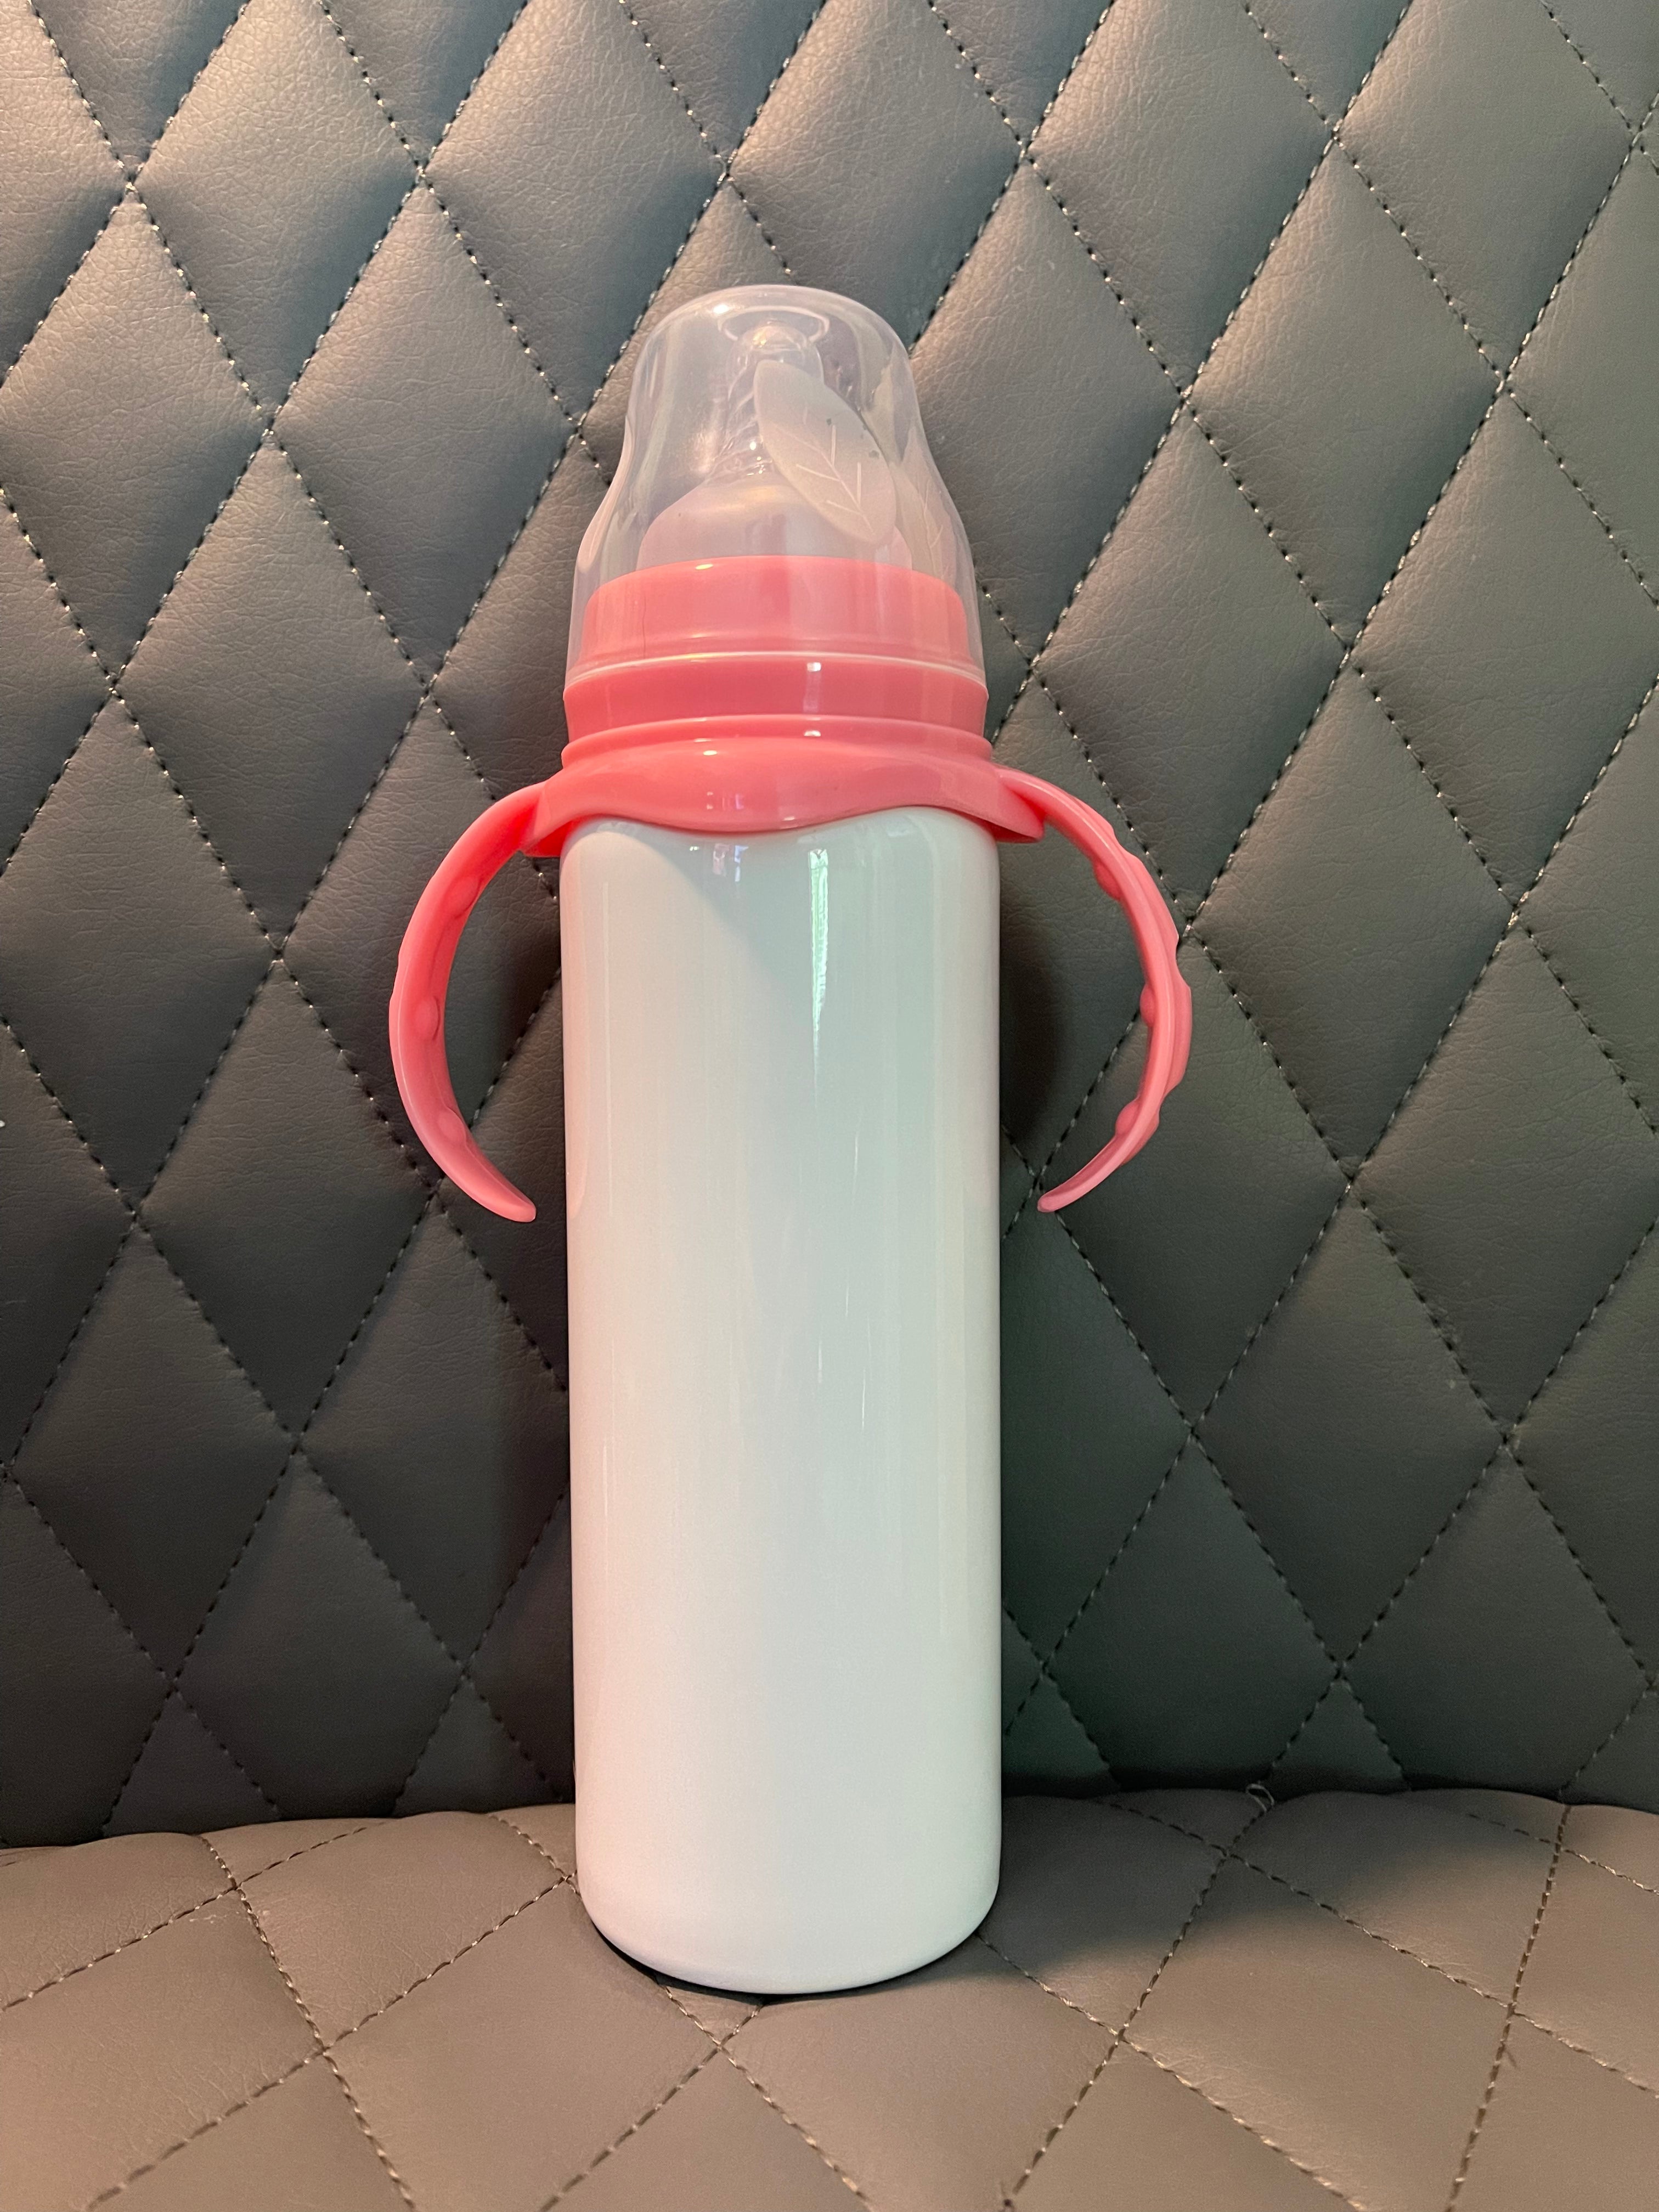 Pink and blue baby bottles